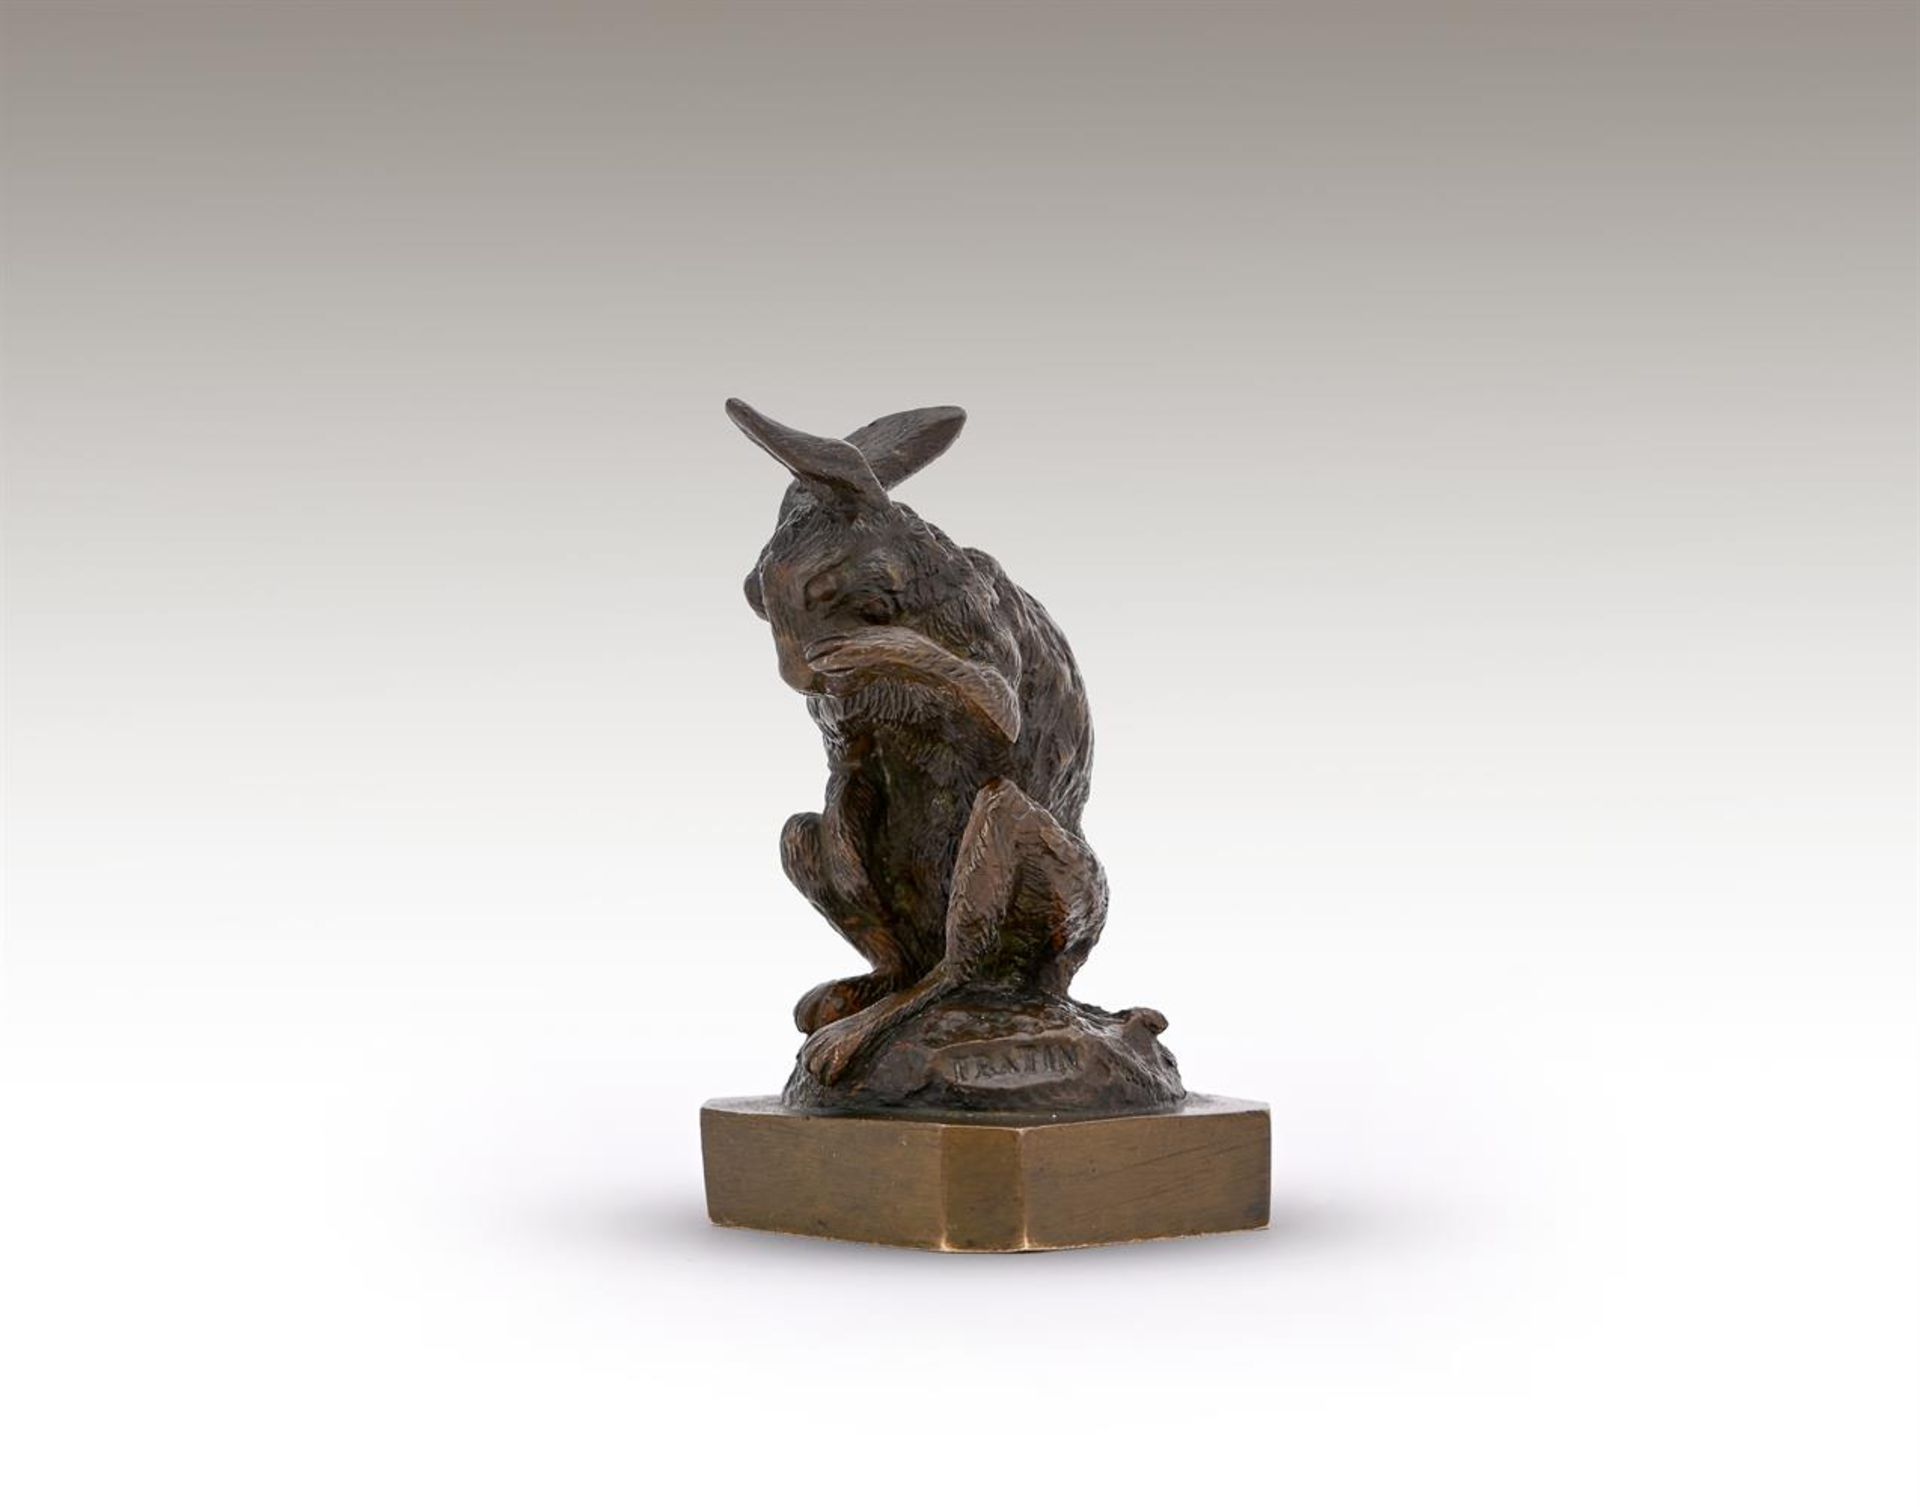 CHRISTOPHE FRATIN (FRENCH, 1801-1864), A BRONZE MODEL OF A HARE GROOMING ITS FACE - Image 6 of 6